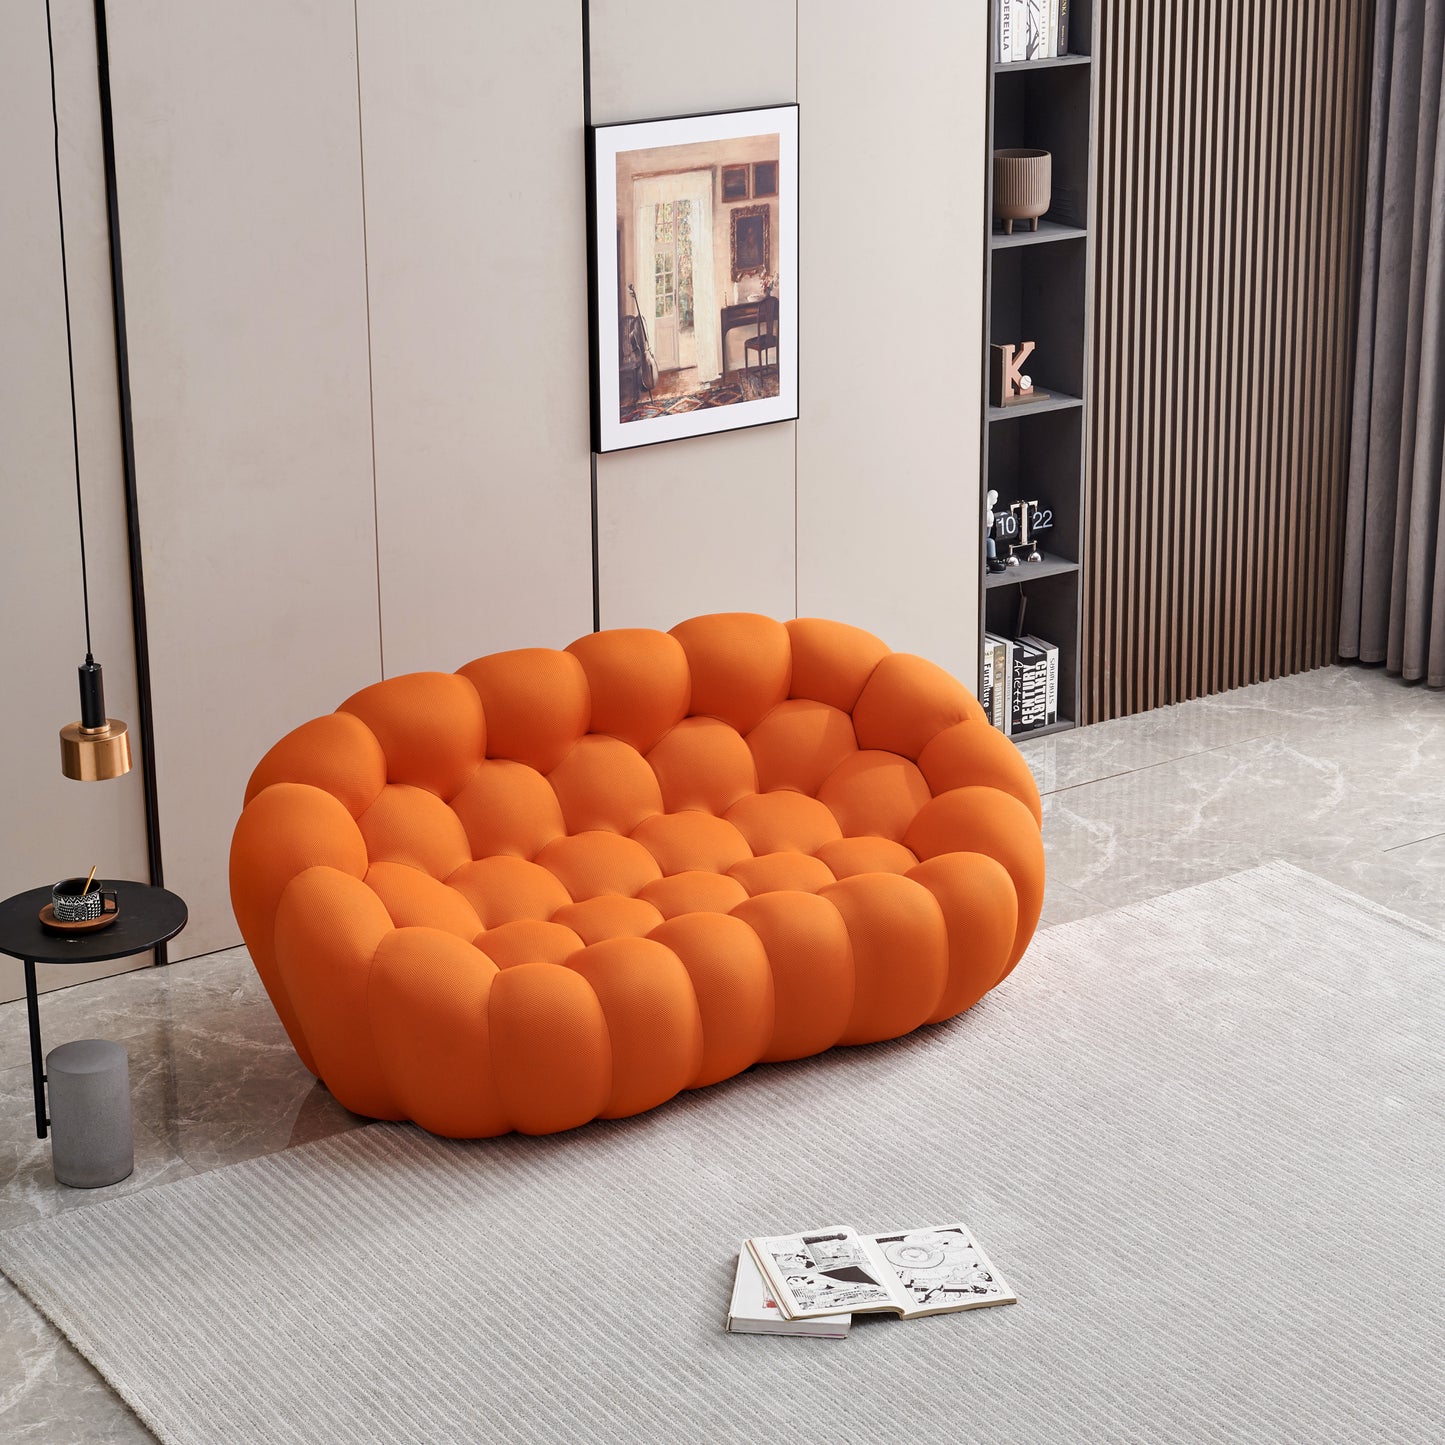 Styling foam whit mesh fabricleisure sofa,Floor oft,modern armless recliner with back,suitable for living room, apartment, bedroom and office.(Orange)